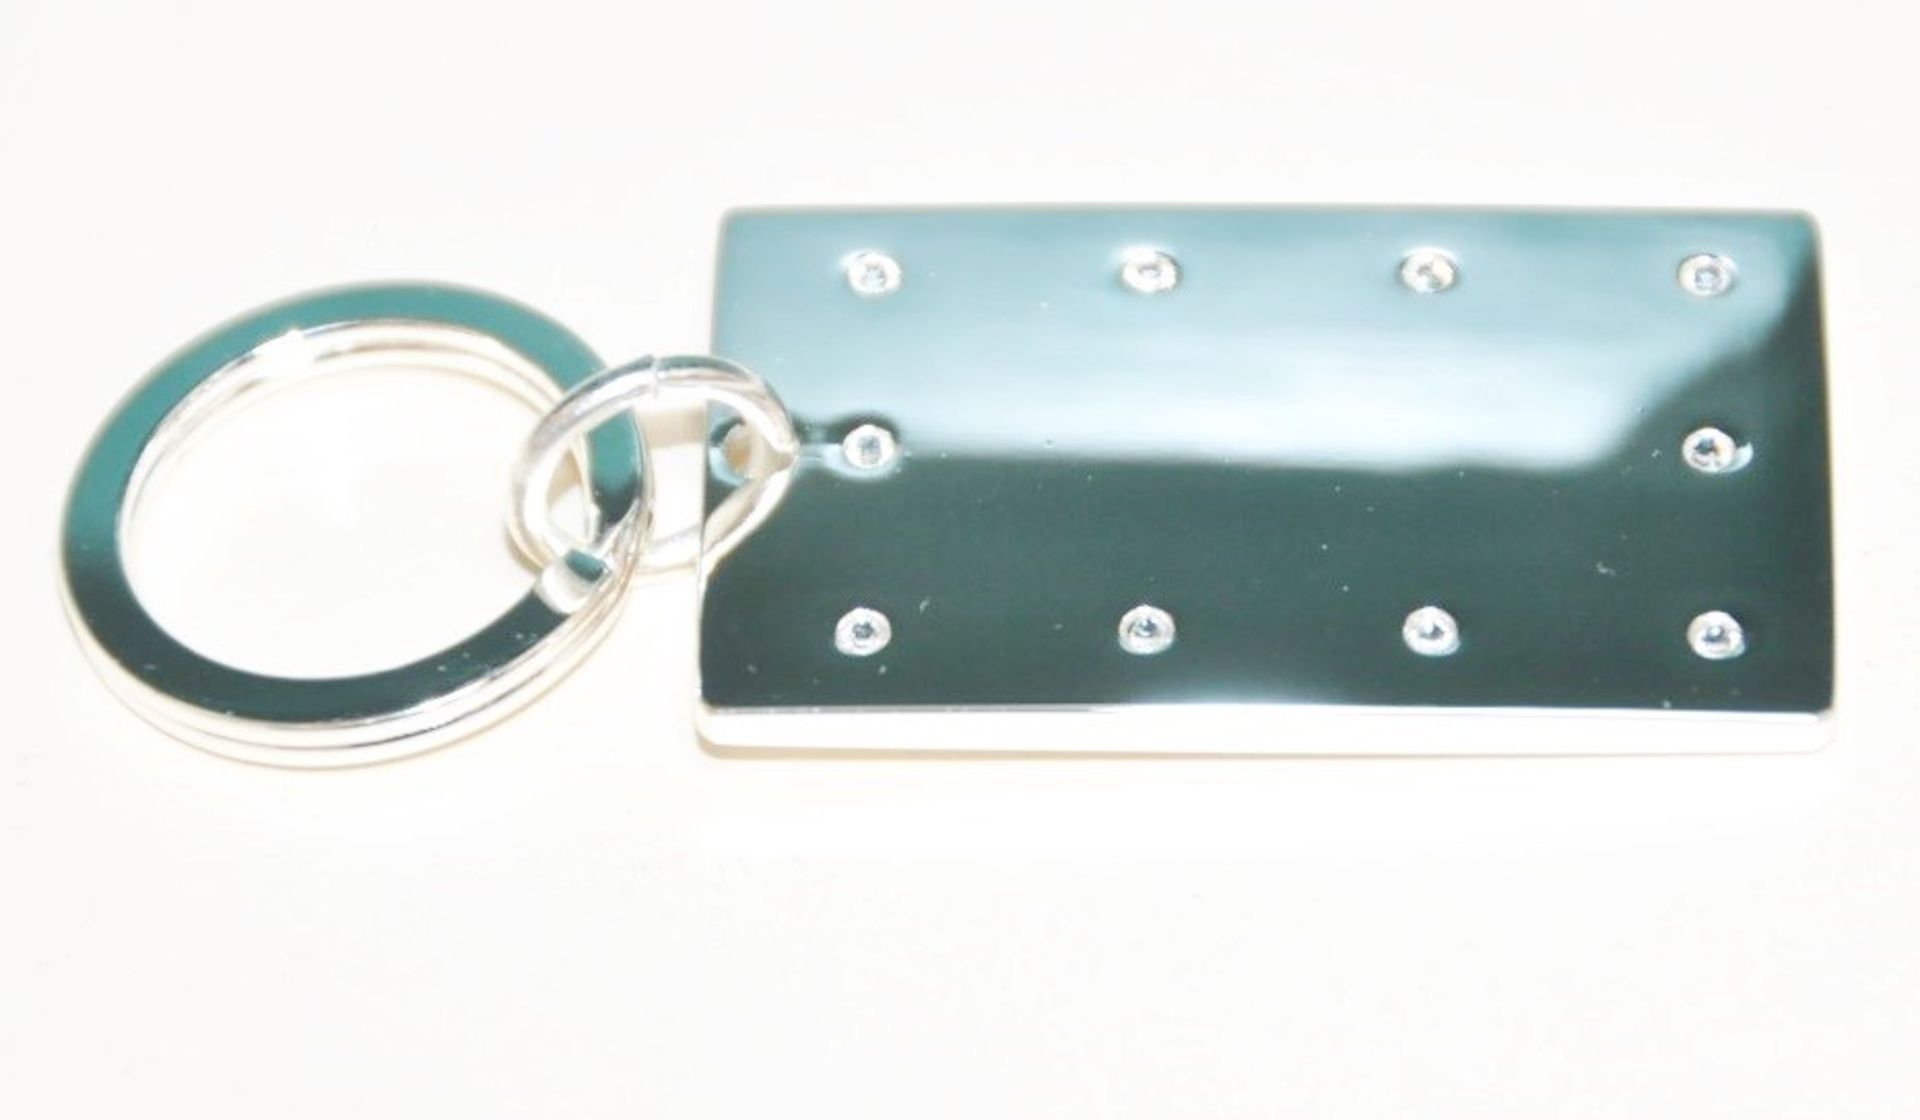 50 x Silver Plated Rectangular Key Rings By ICE London - MADE WITH "SWAROVSKI¨ ELEMENTS - Luxury - Image 4 of 6